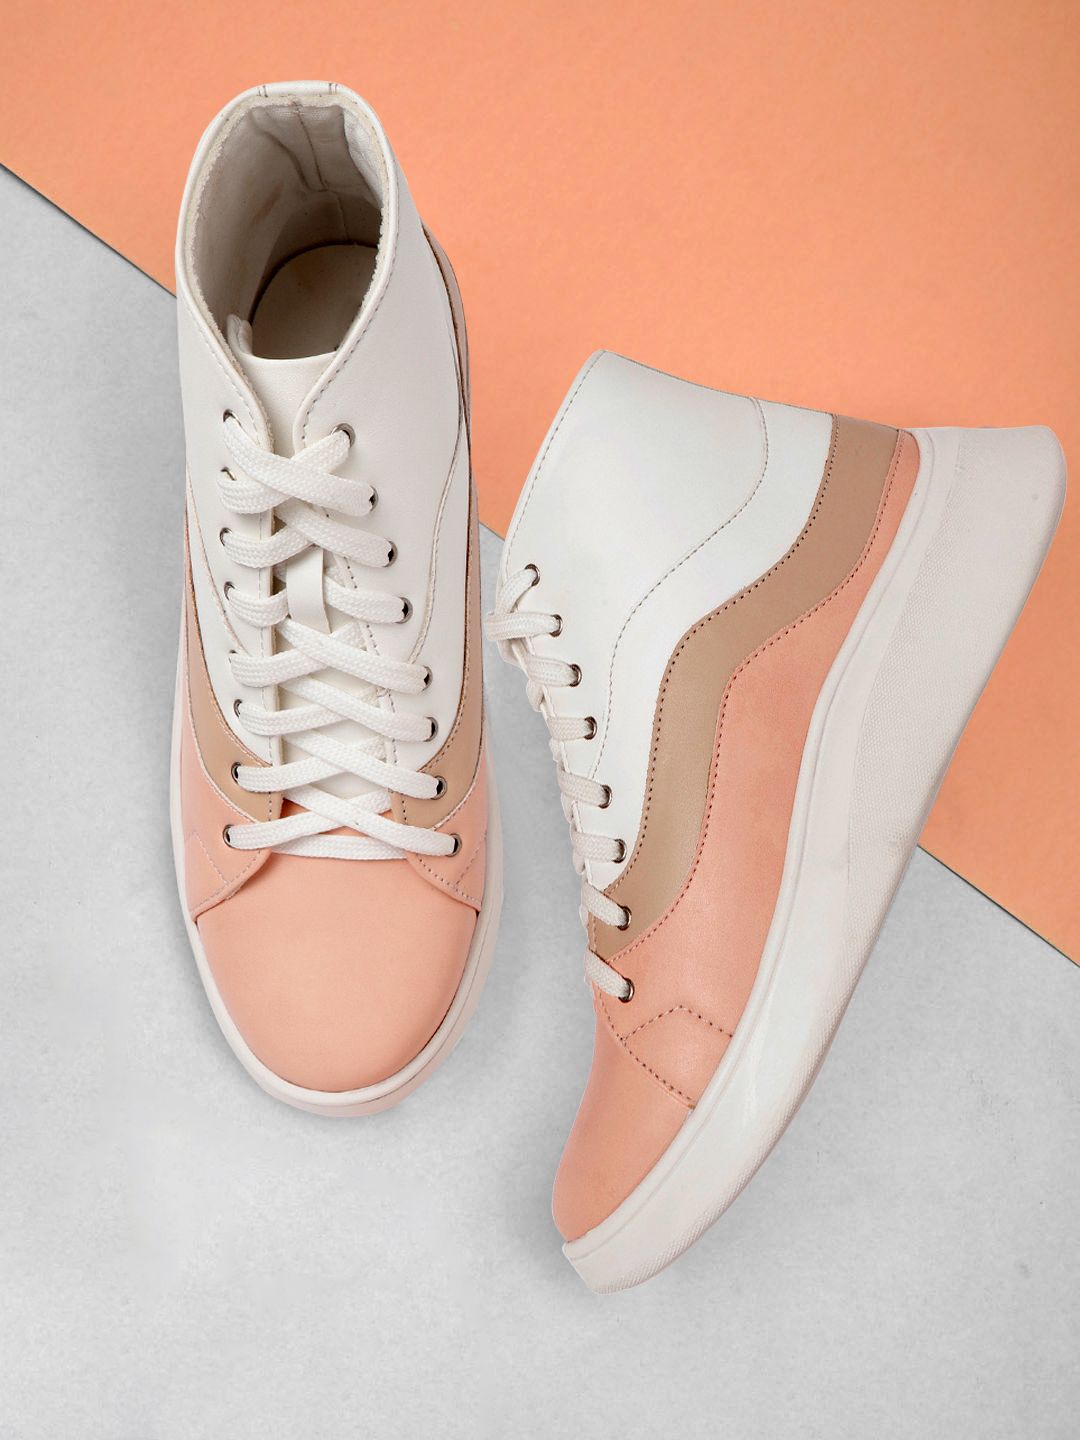 Roadster Women White & Peach-Coloured Colourblocked Mid-Top Sneakers Price in India